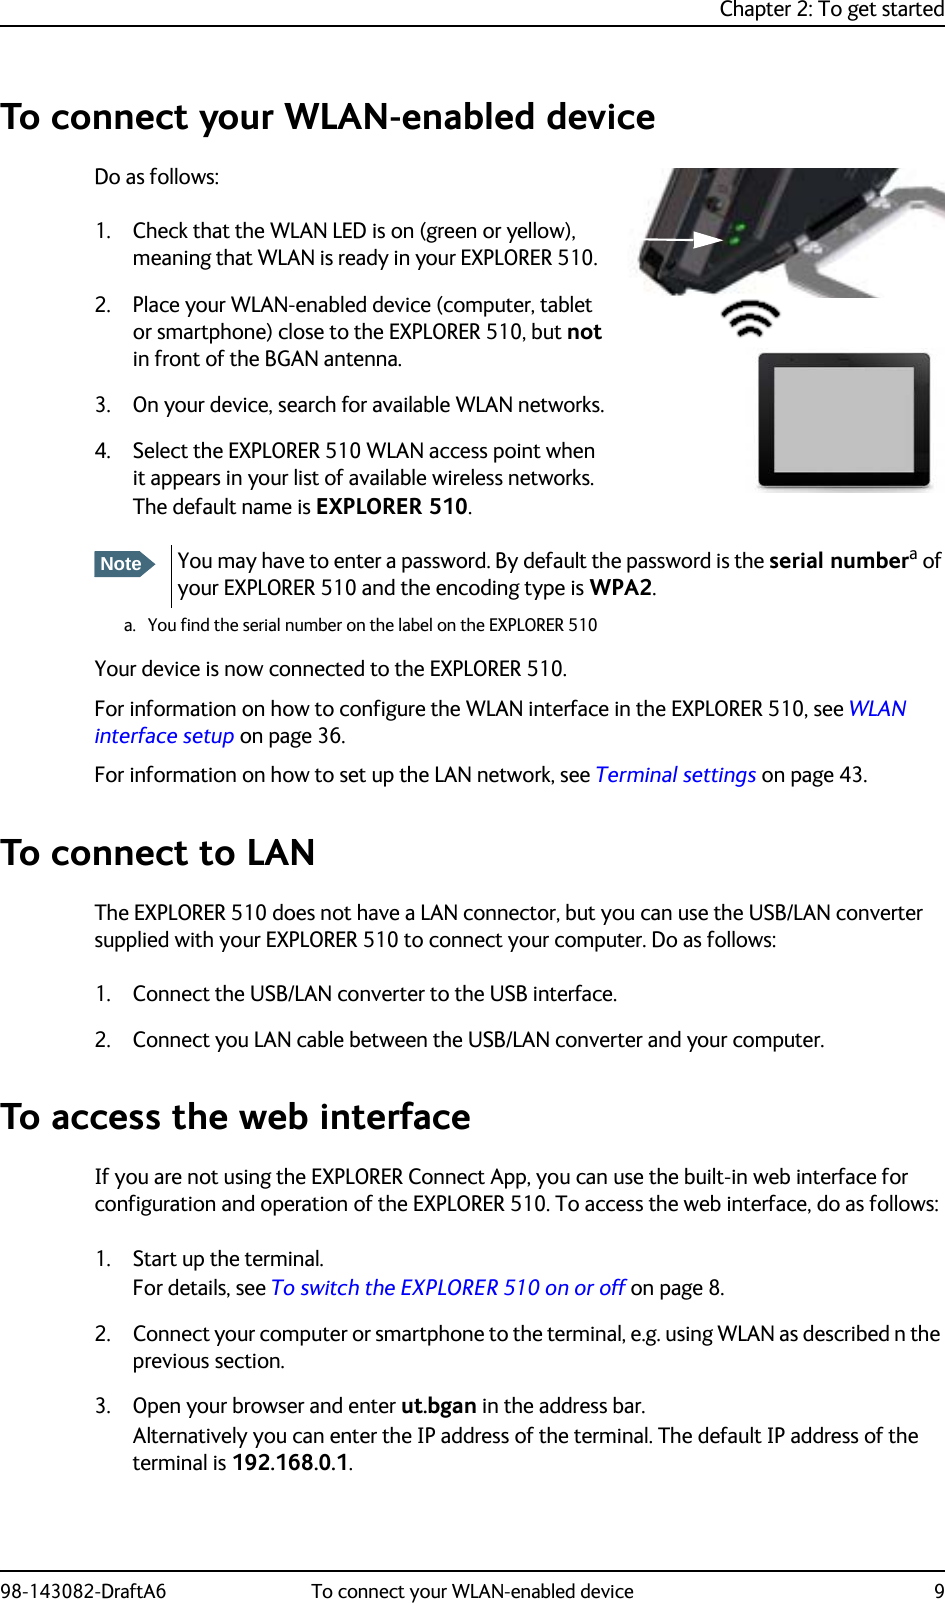 Chapter 2: To get started98-143082-DraftA6 To connect your WLAN-enabled device 9To connect your WLAN-enabled deviceDo as follows:1. Check that the WLAN LED is on (green or yellow), meaning that WLAN is ready in your EXPLORER 510. 2. Place your WLAN-enabled device (computer, tablet or smartphone) close to the EXPLORER 510, but not in front of the BGAN antenna.3. On your device, search for available WLAN networks.4. Select the EXPLORER 510 WLAN access point when it appears in your list of available wireless networks. The default name is EXPLORER 510. Your device is now connected to the EXPLORER 510.For information on how to configure the WLAN interface in the EXPLORER 510, see WLAN interface setup on page 36.For information on how to set up the LAN network, see Terminal settings on page 43.To connect to LANThe EXPLORER 510 does not have a LAN connector, but you can use the USB/LAN converter supplied with your EXPLORER 510 to connect your computer. Do as follows:1. Connect the USB/LAN converter to the USB interface.2. Connect you LAN cable between the USB/LAN converter and your computer.To access the web interfaceIf you are not using the EXPLORER Connect App, you can use the built-in web interface for configuration and operation of the EXPLORER 510. To access the web interface, do as follows:1. Start up the terminal. For details, see To switch the EXPLORER 510 on or off on page 8.2. Connect your computer or smartphone to the terminal, e.g. using WLAN as described n the previous section.3. Open your browser and enter ut.bgan in the address bar.Alternatively you can enter the IP address of the terminal. The default IP address of the terminal is 192.168.0.1.NoteYou may have to enter a password. By default the password is the serial numbera of your EXPLORER 510 and the encoding type is WPA2.a. You find the serial number on the label on the EXPLORER 510